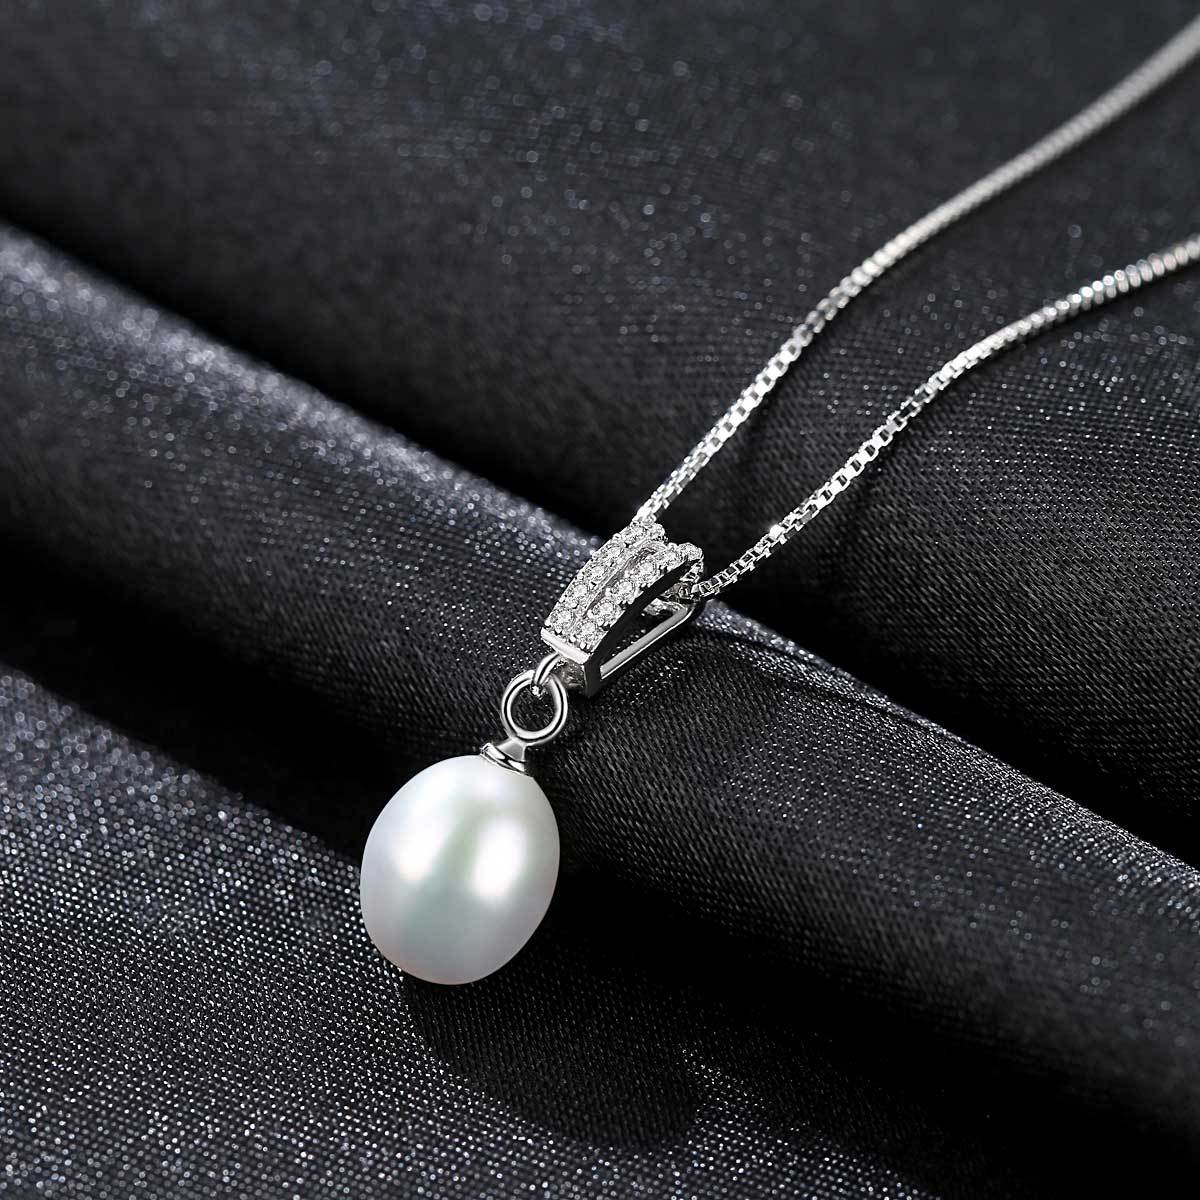 Large Pearl Pendant Necklace - HERS